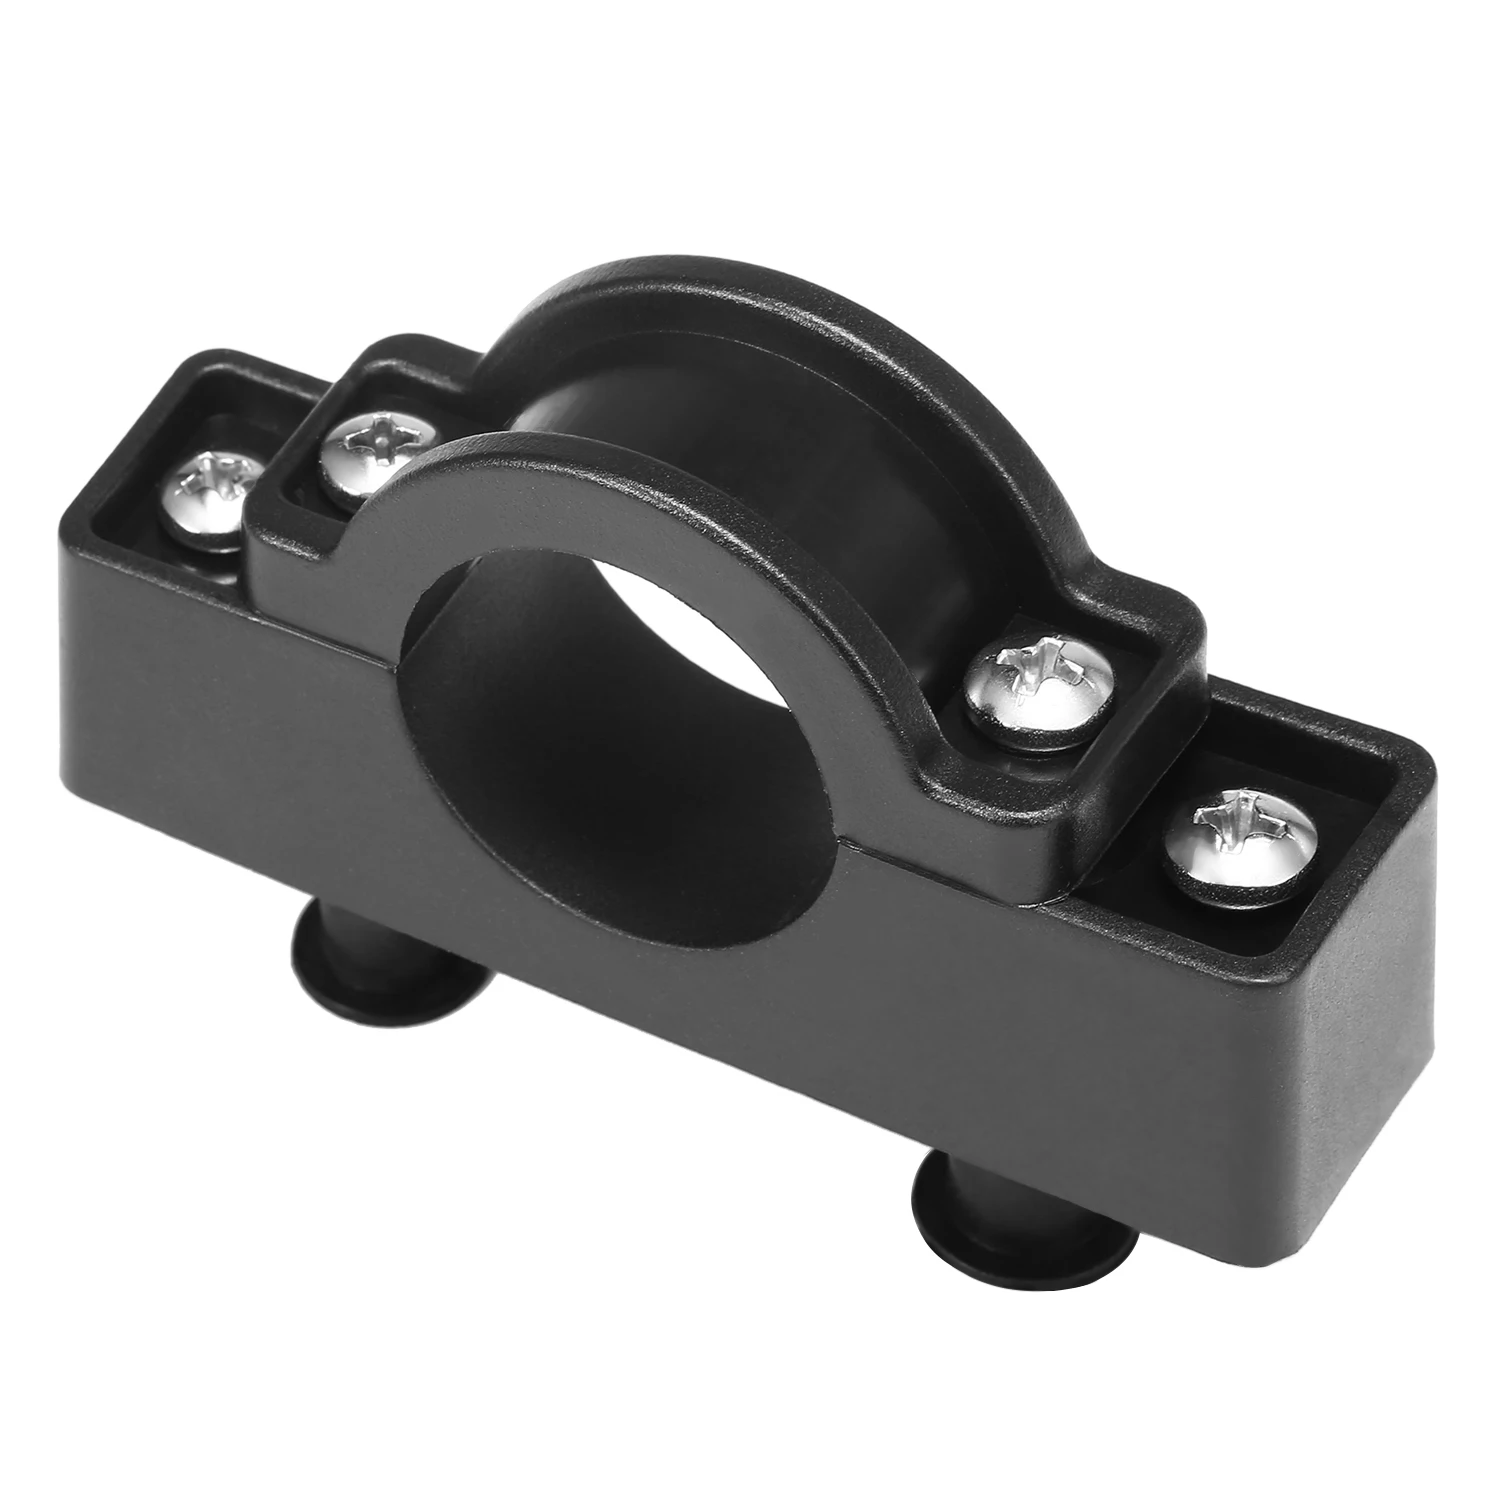 1 Pair of Kayak Mount Holders with Hardware